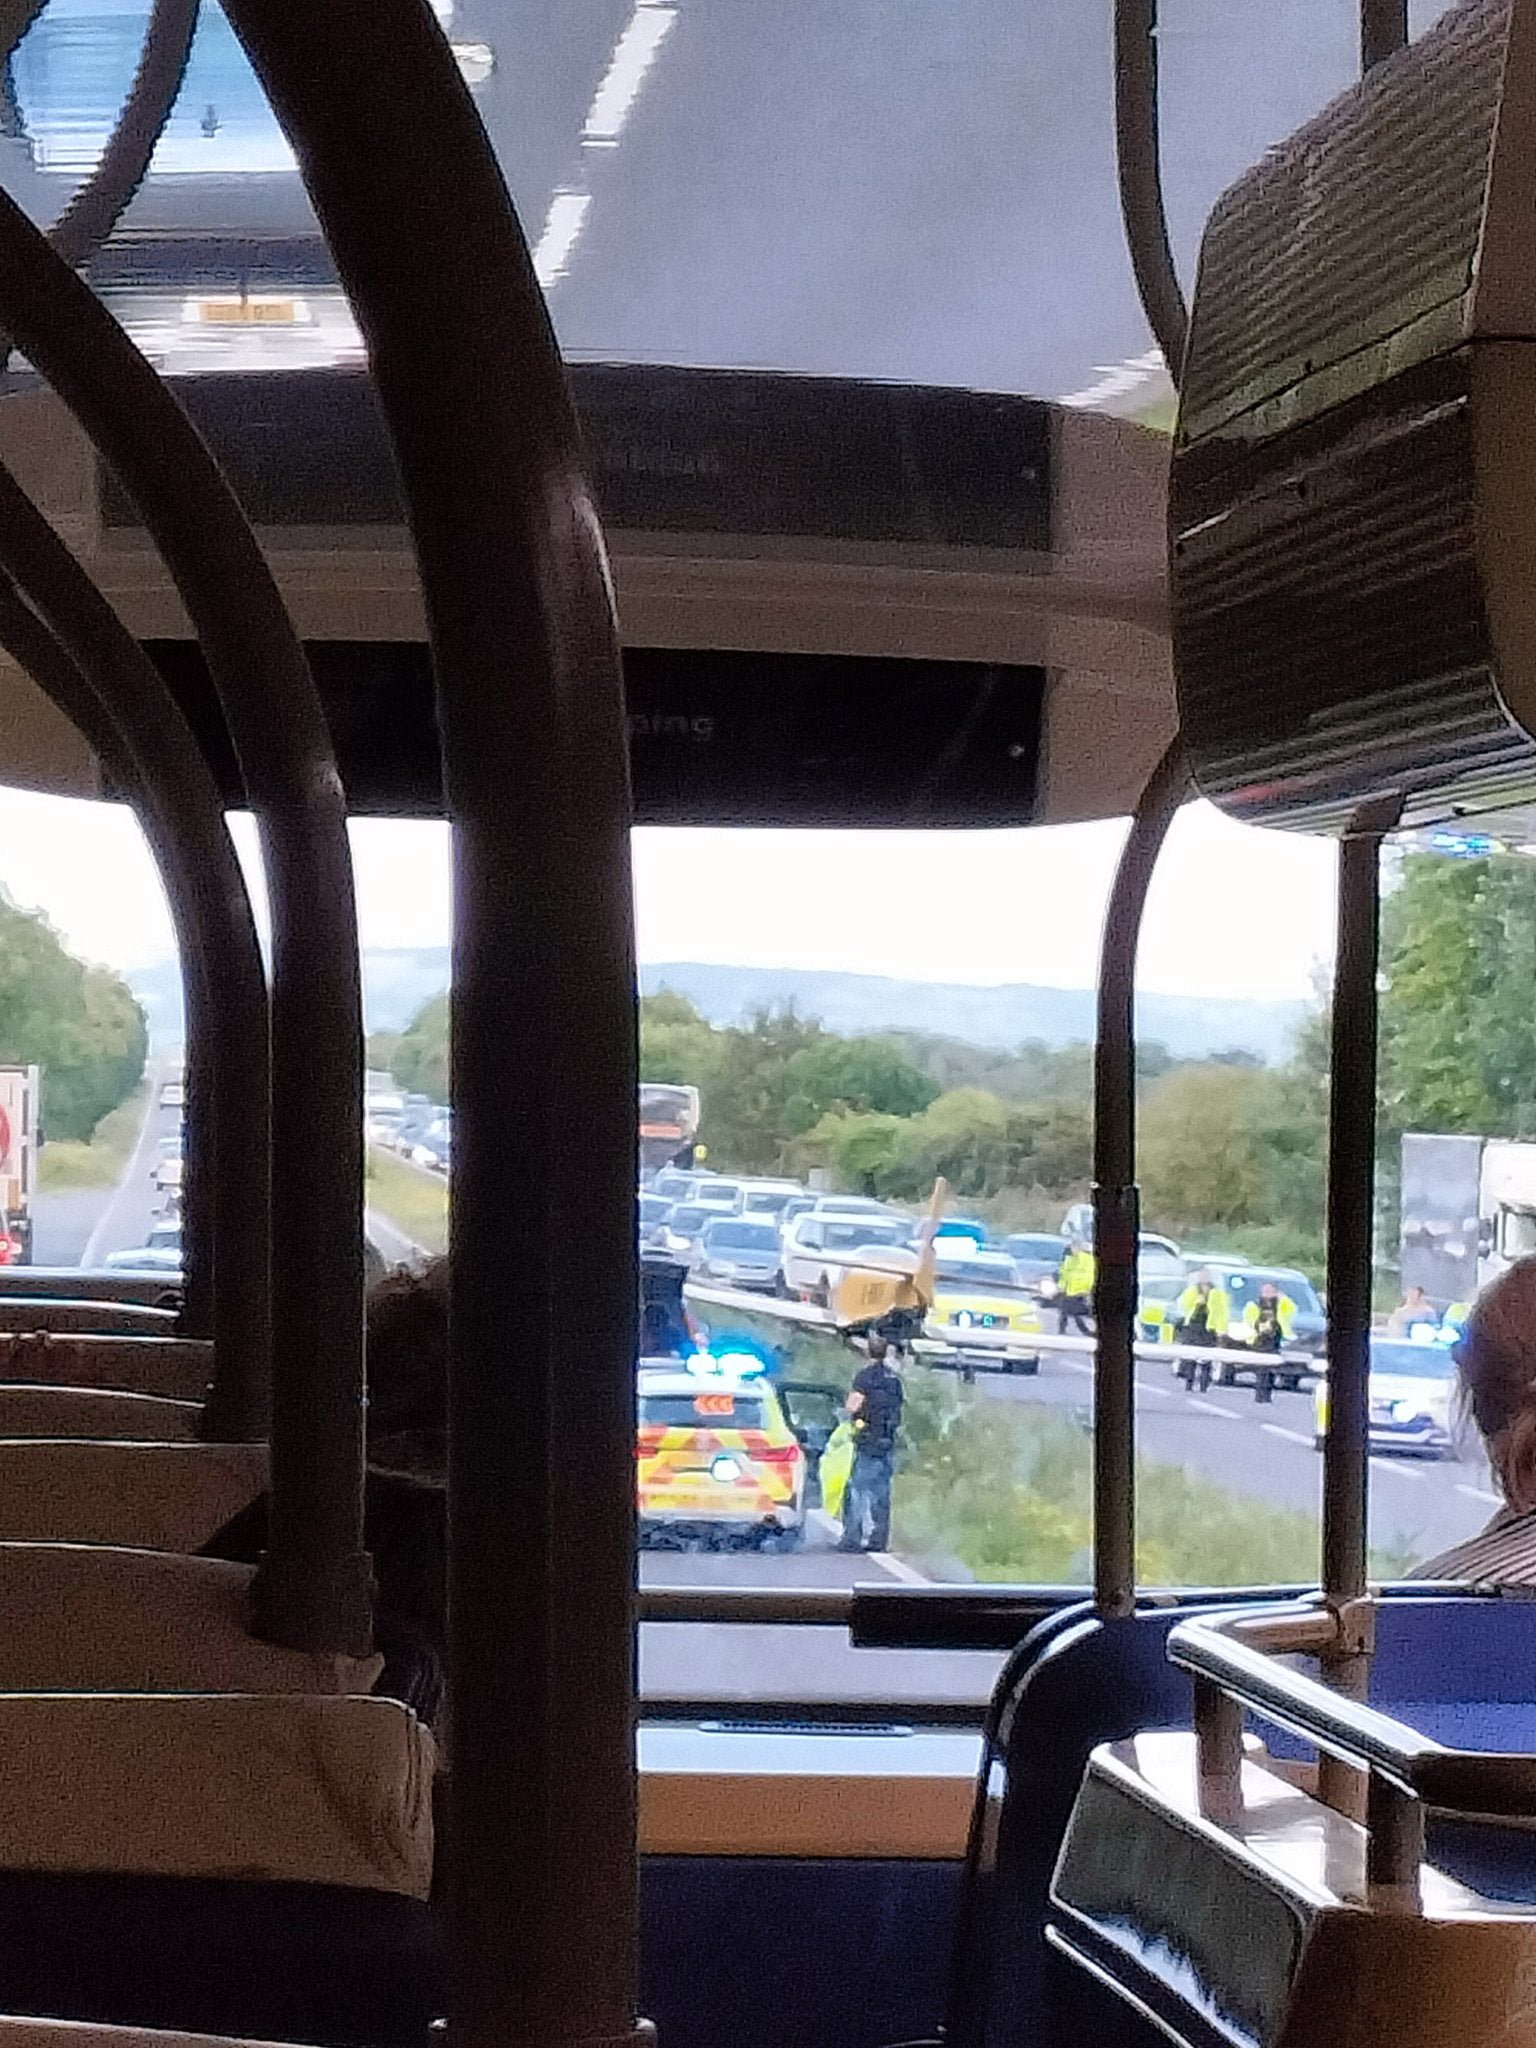 A bus passenger was ‘pretty surprised’ to see the plane